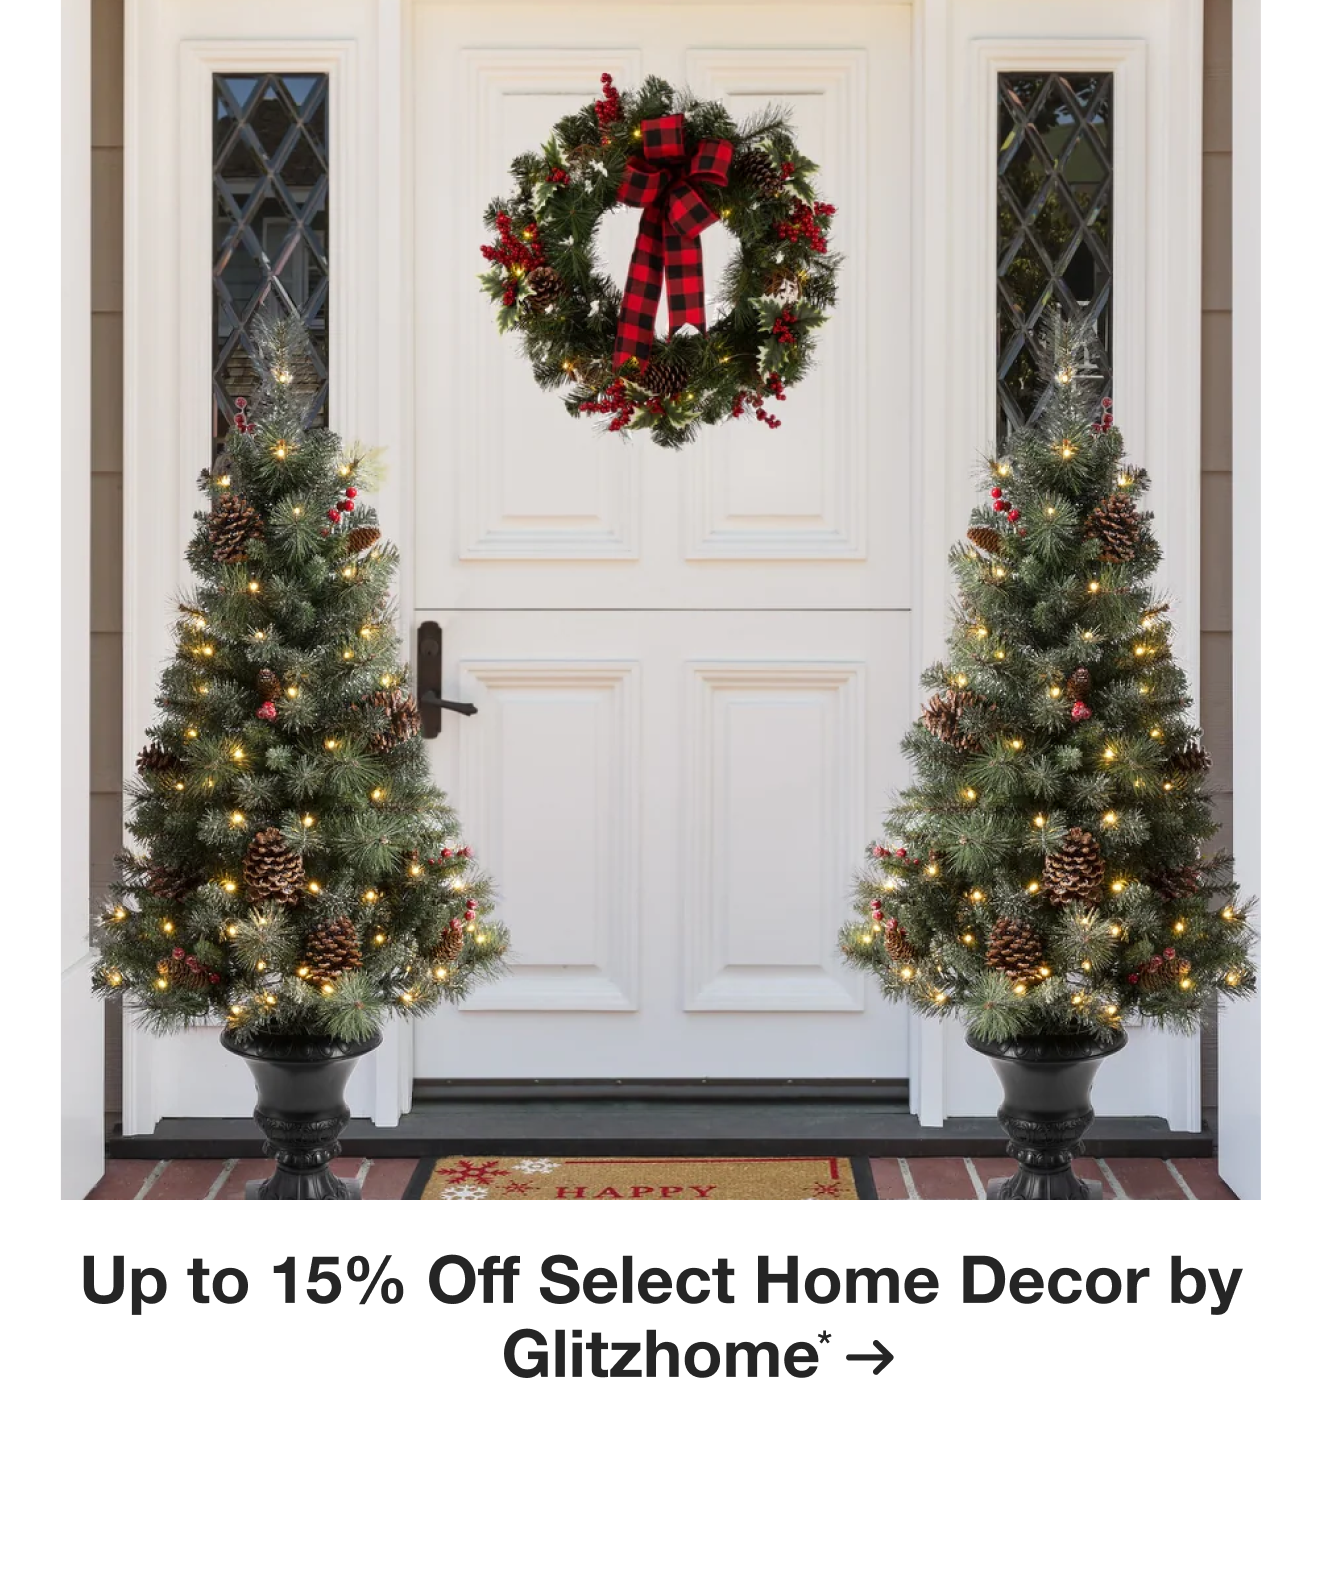 Up to 15% Off Select Home Decor by Glitzhome*